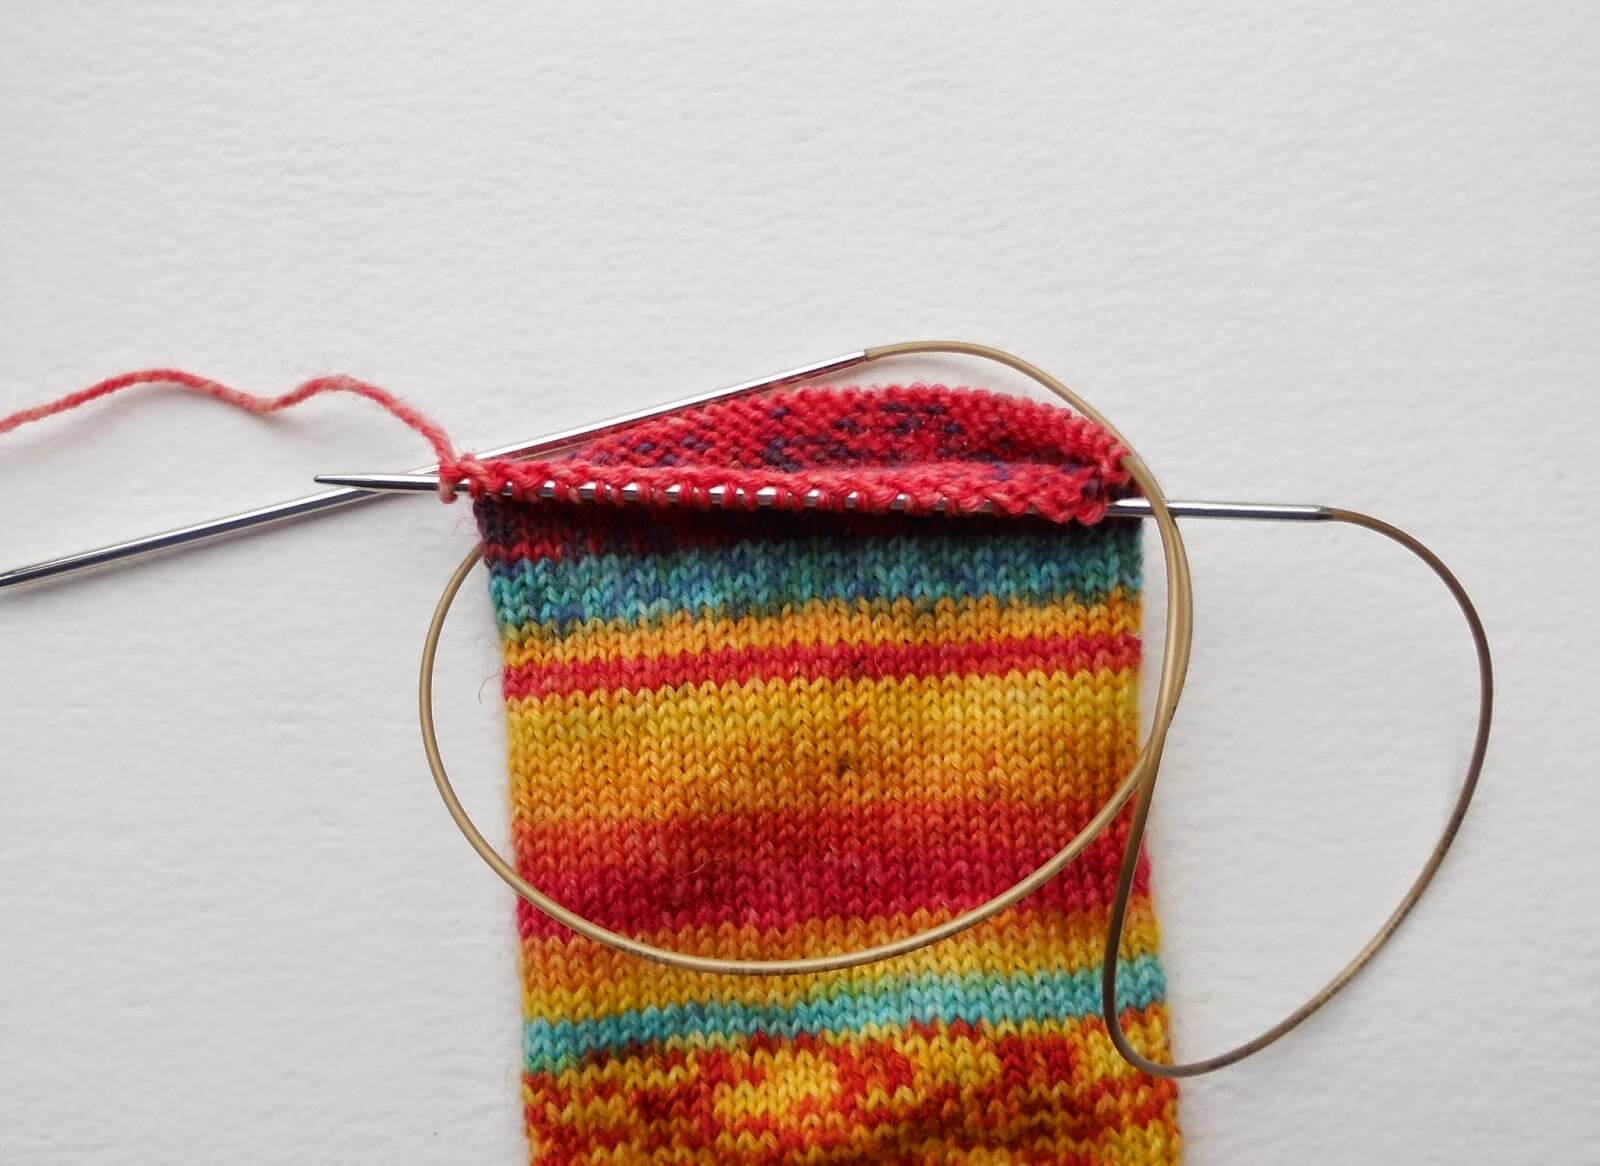 Making the Knitting Needle Case, version 2022, video tutorial